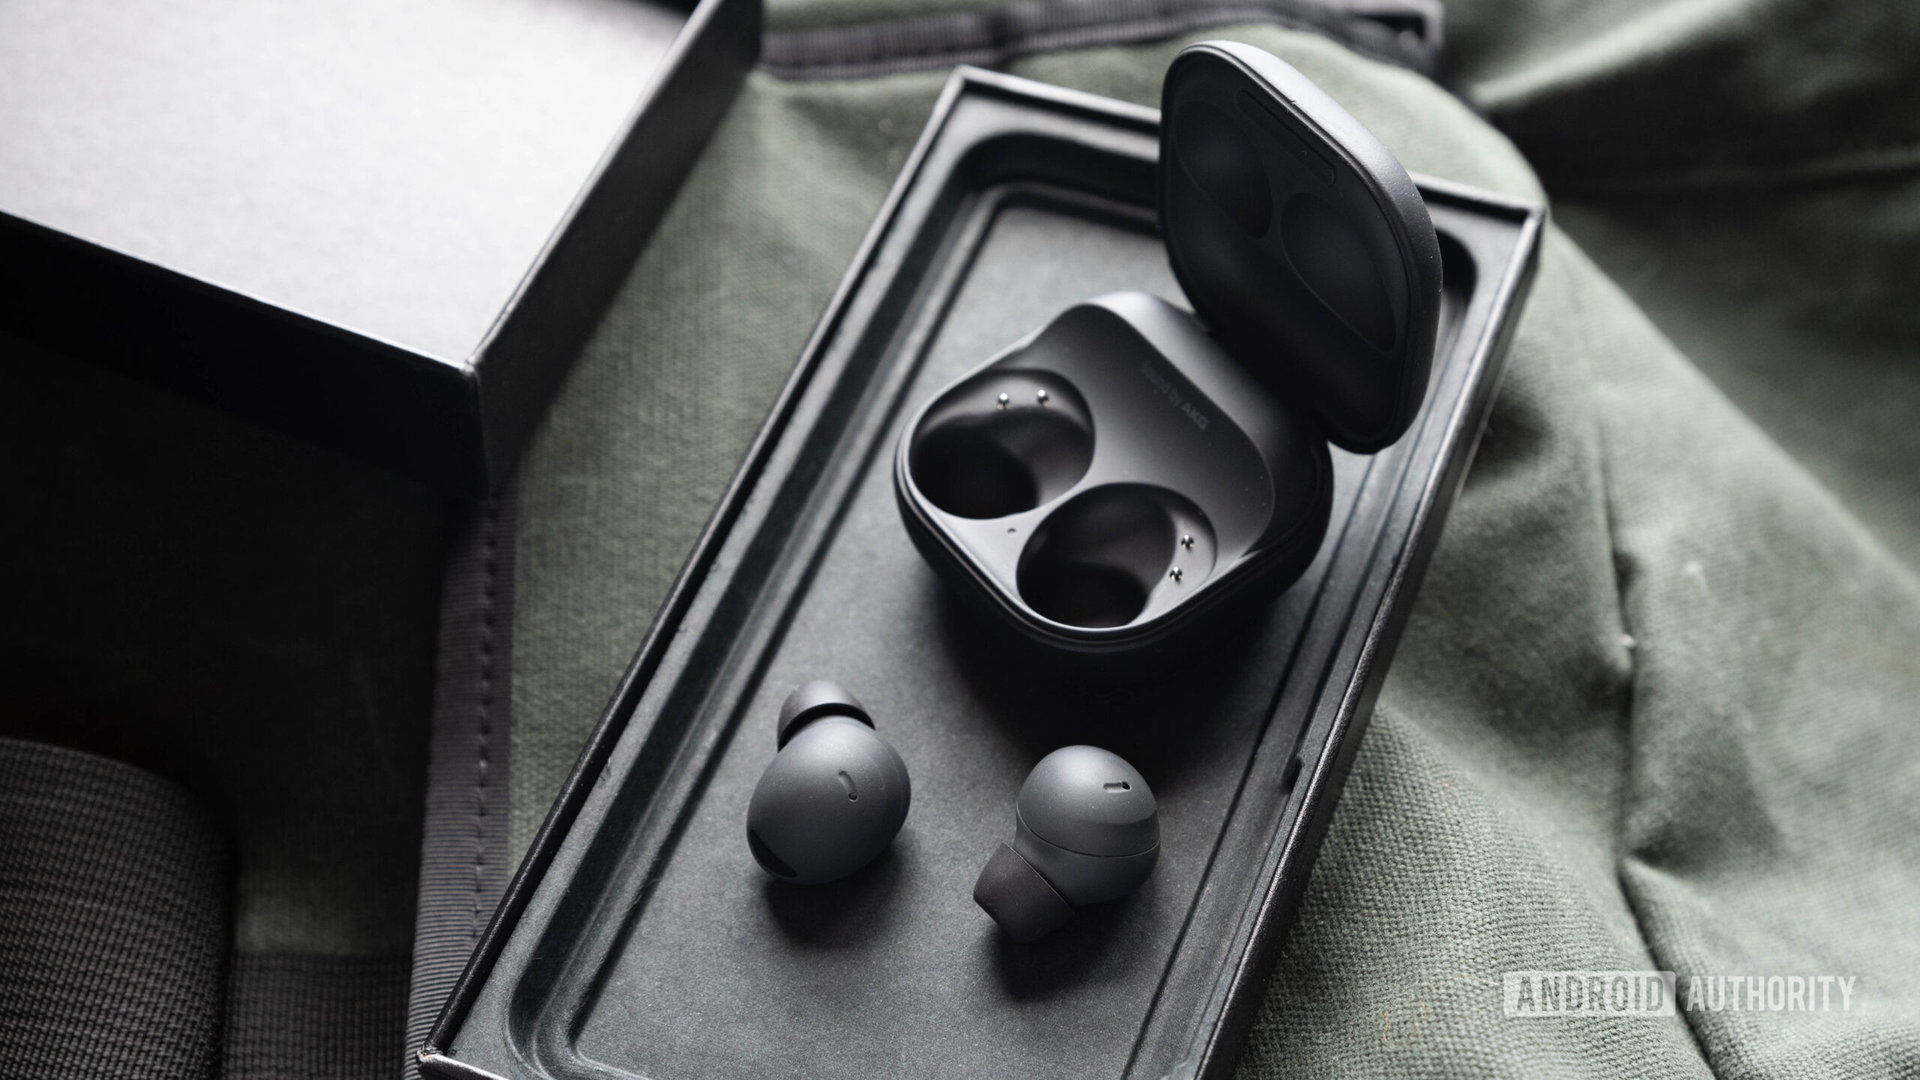 The samsung galaxy buds 2 pro earbuds outside of the open case.